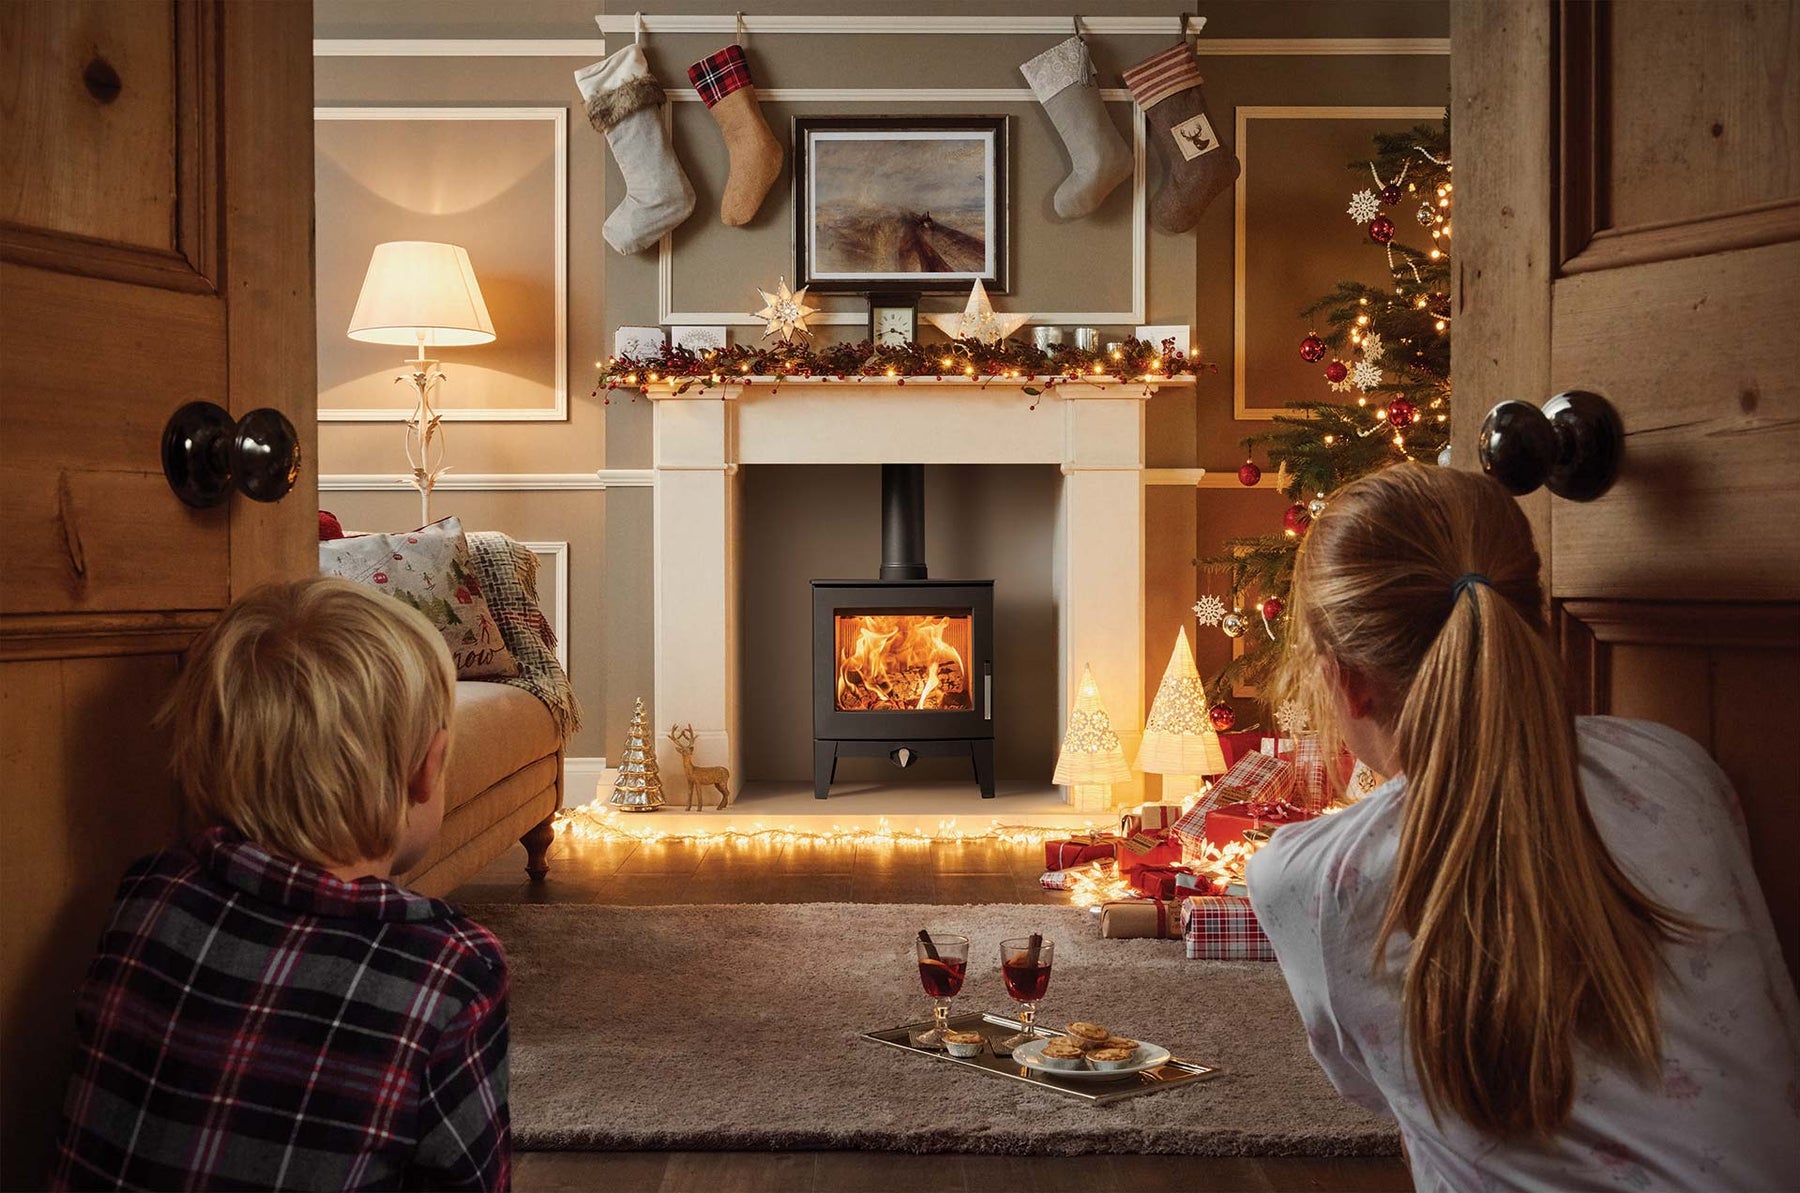 The energy efficiency of Electric, Gas, and wood fireplace